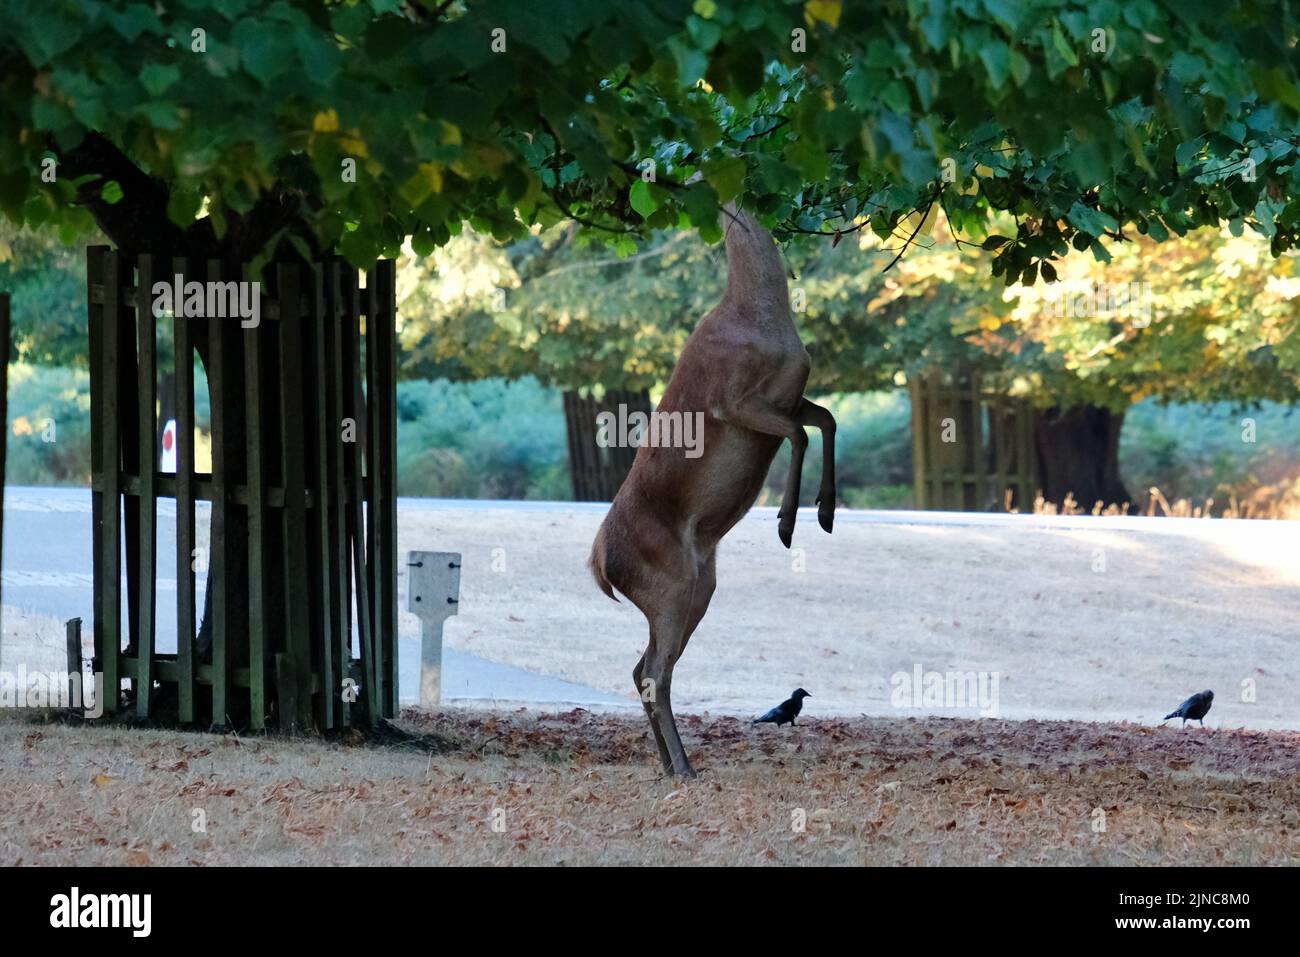 London, UK, 10th Aug, 2022.  A red deer reaches up to feed on juicy tree leaves. After continuing hot, sunny conditions, with the driest July on record has left the park with large areas of yellowing grass. An Amber Extreme heat warning was issued by the Met Office this week as temmperatures are expected to reach mid-30 degrees celsius.  Credit: Eleventh Hour Photography/Alamy Live News Stock Photo